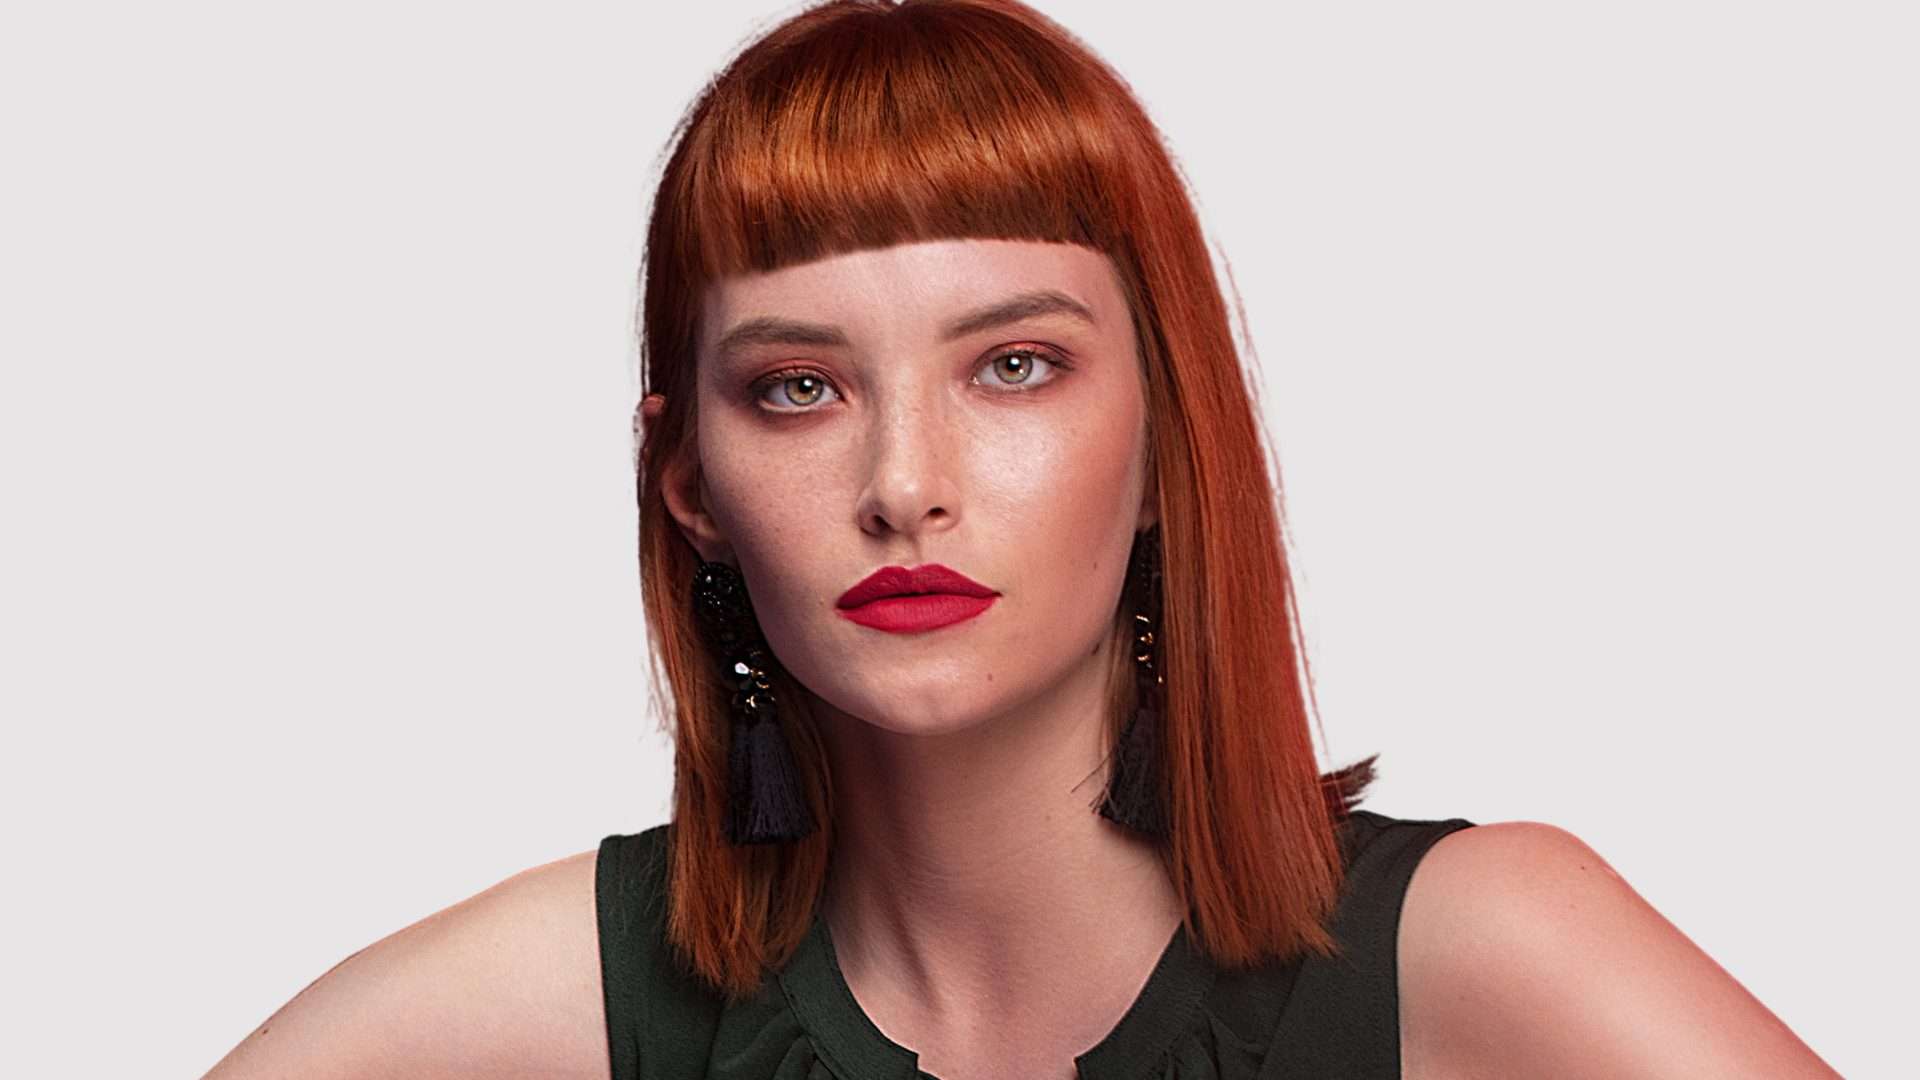 Red haired female model with a full fringe to demonstrate volume in the fringe 